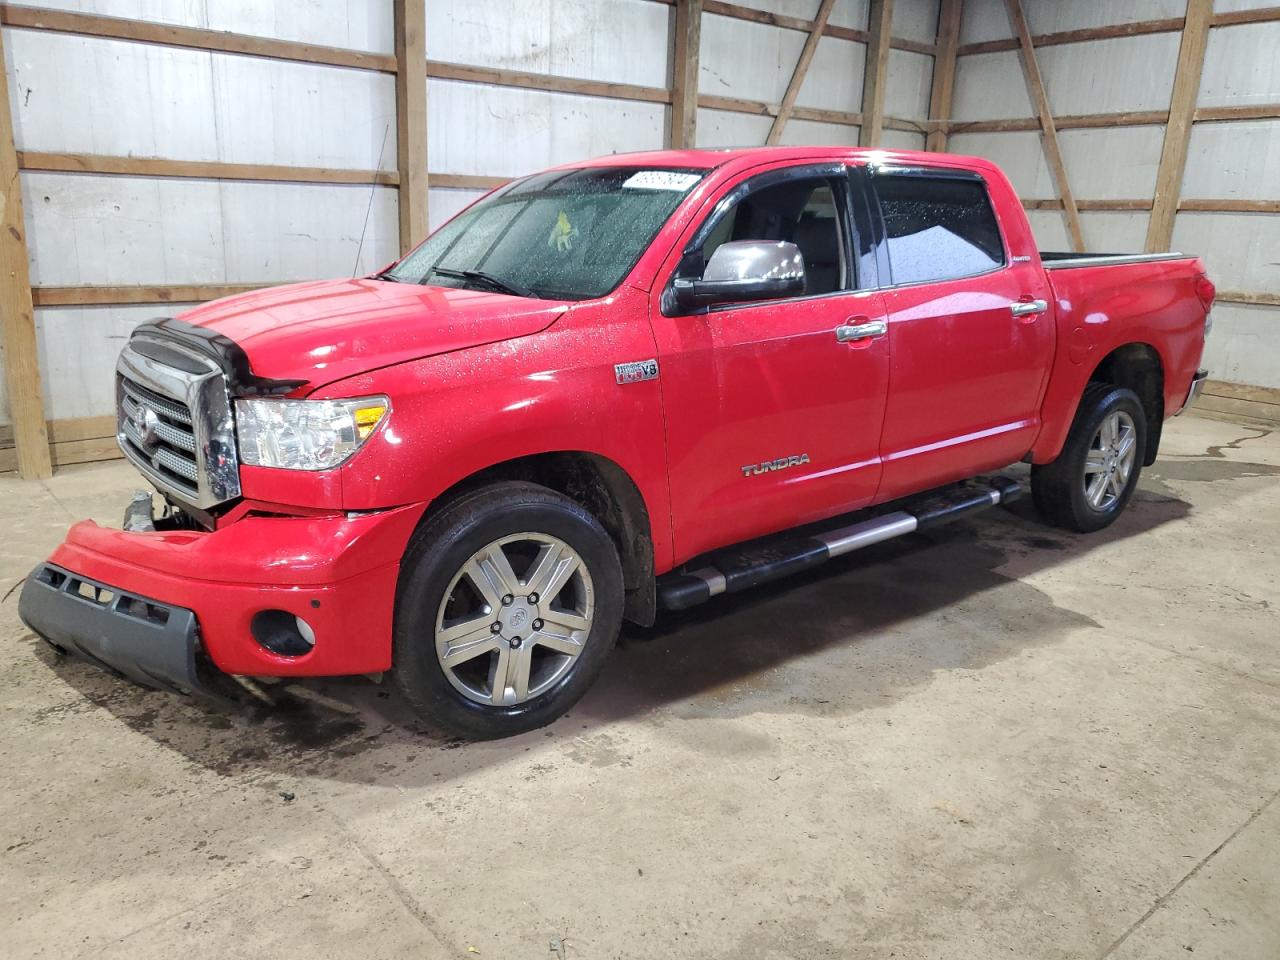 vin: 5TBDV58158S491194 5TBDV58158S491194 2008 toyota tundra 5700 for Sale in 44028 9176, Oh - Cleveland West, Columbia Station, Ohio, USA